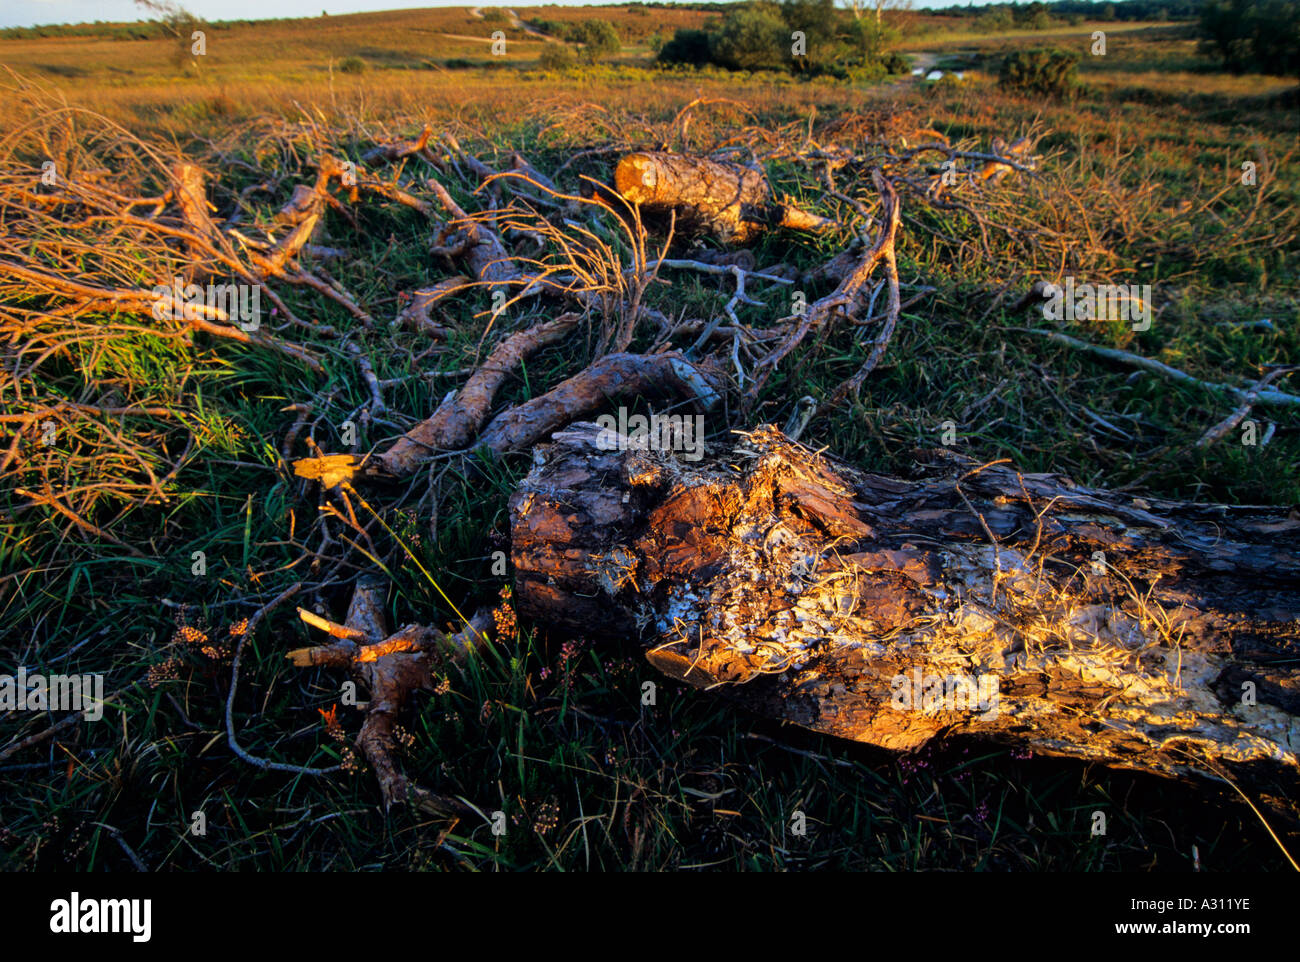 Felled trees on Crab Tree Earth New Forest Hampshire England UK Stock Photo